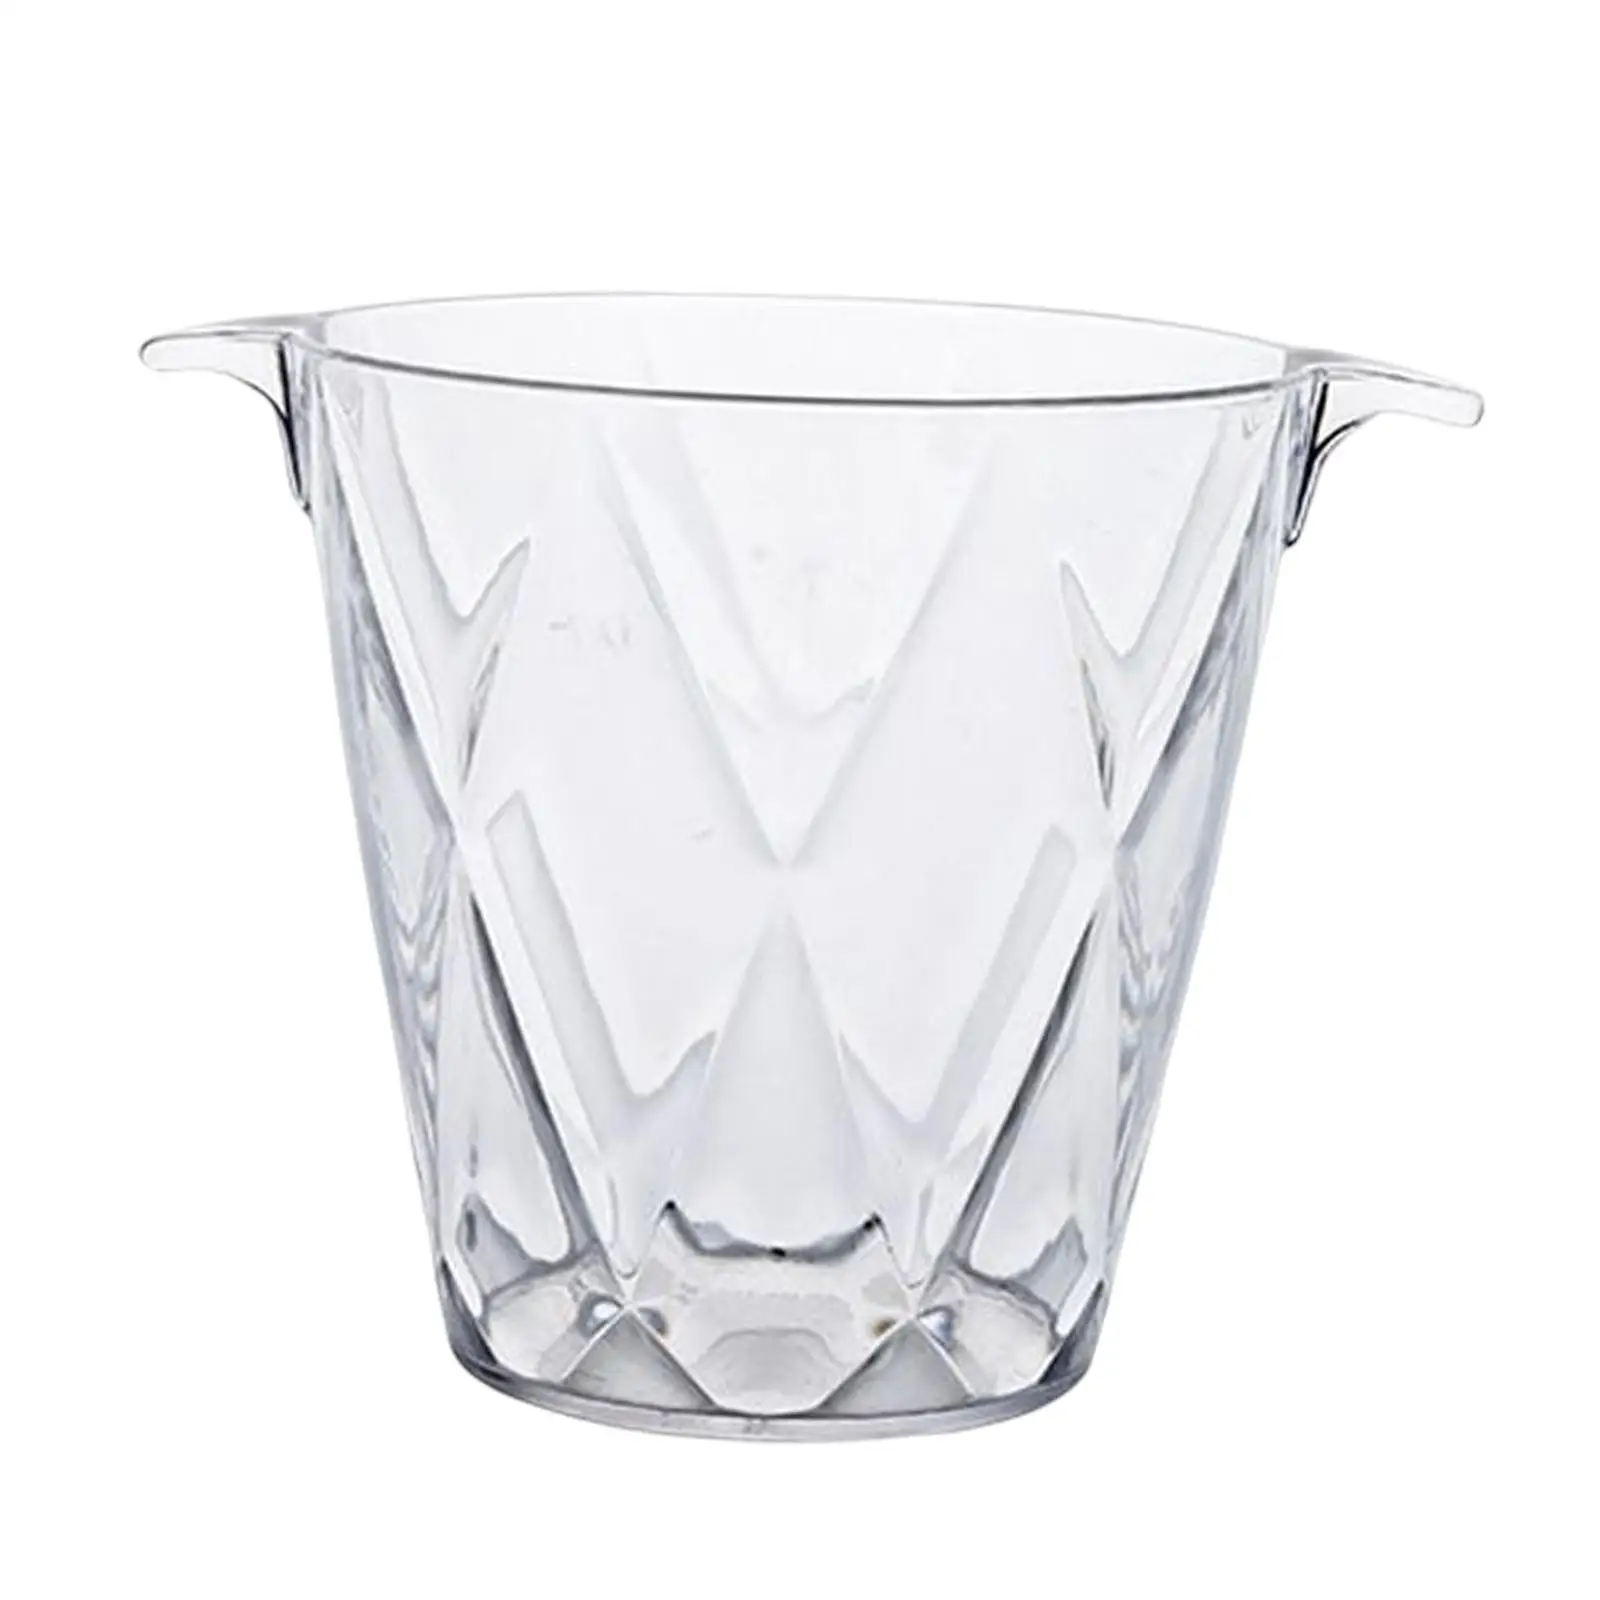 Ice Bucket Bucket, Portable Ice Container, Ice Tub, Party Beverage Bin for Bottle Hotel Restaurant Cocktail Parties